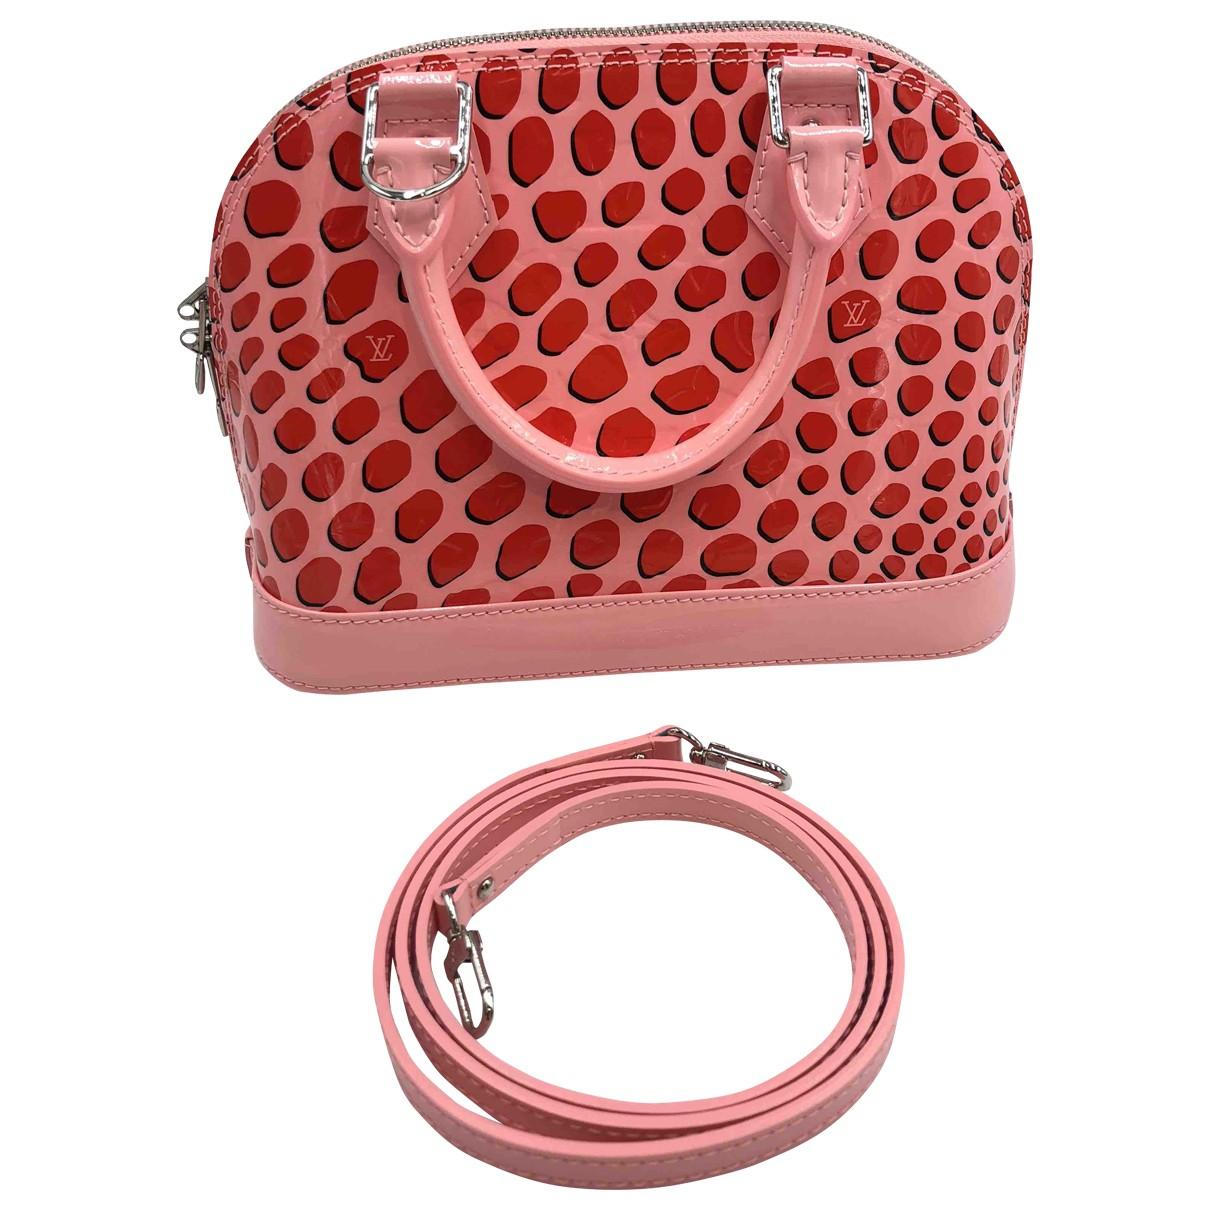 Louis Vuitton Alma Bb Patent Leather Crossbody Bag in Red - Lyst